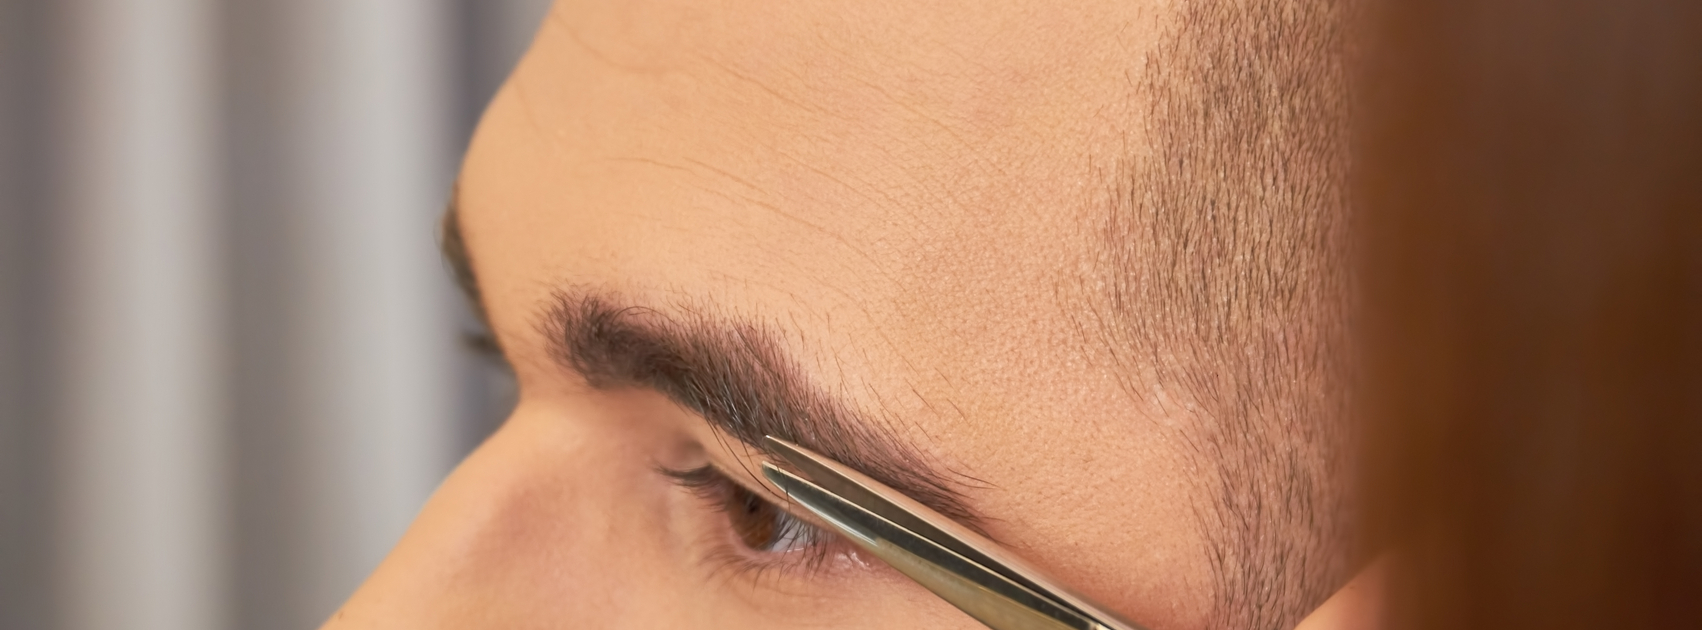 Perfectly shaped eyebrows - guidelines for trimming.